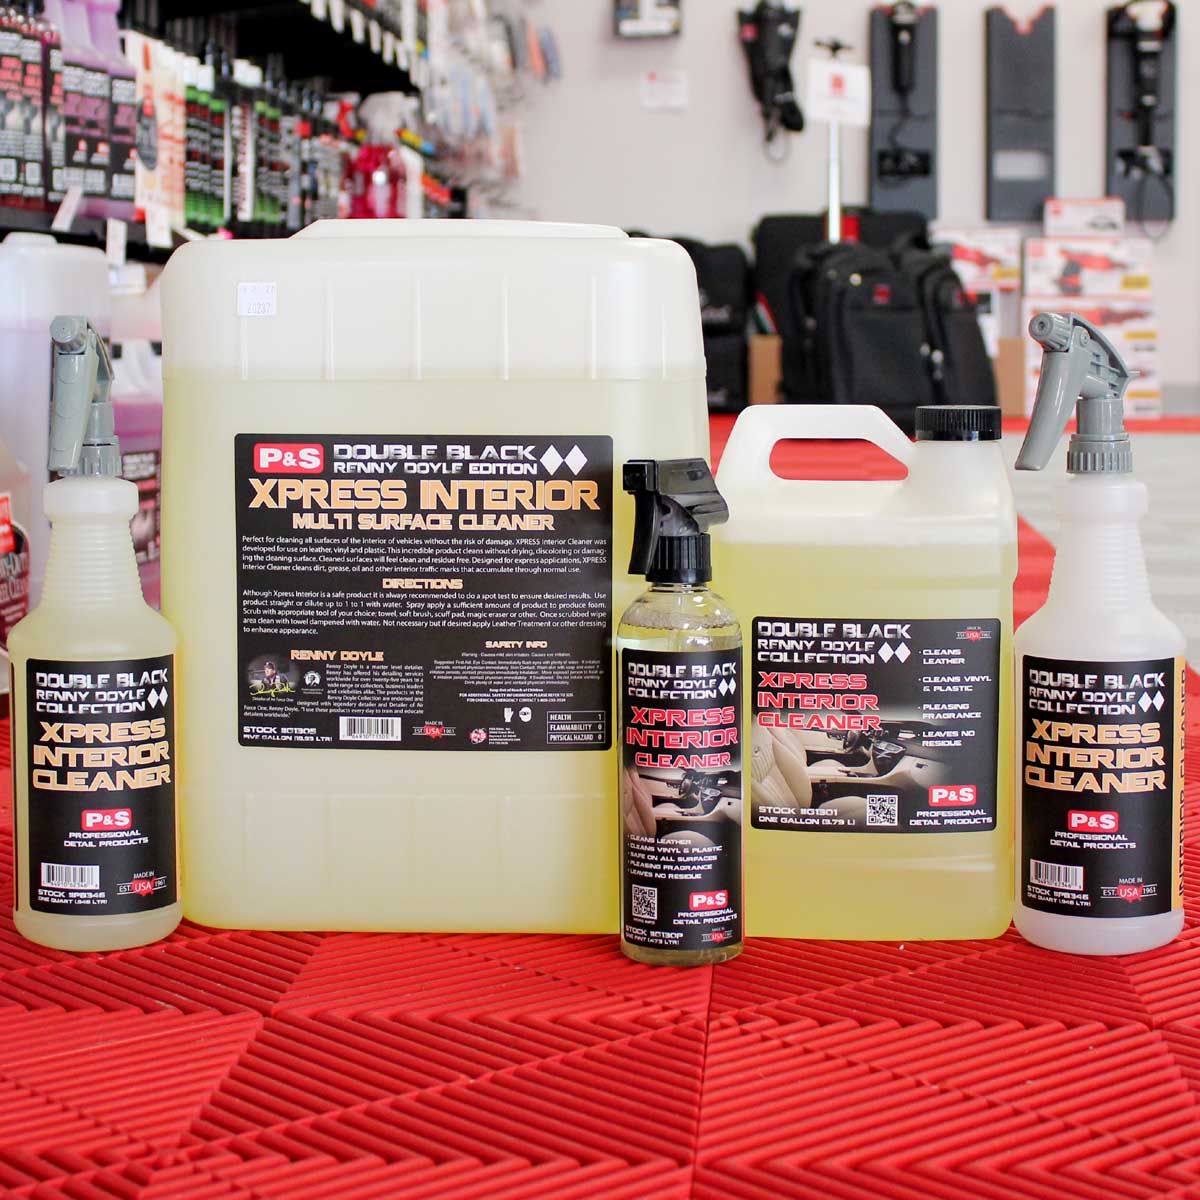 P&S Xpress Interior Cleaner : The BEST interior cleaner! 